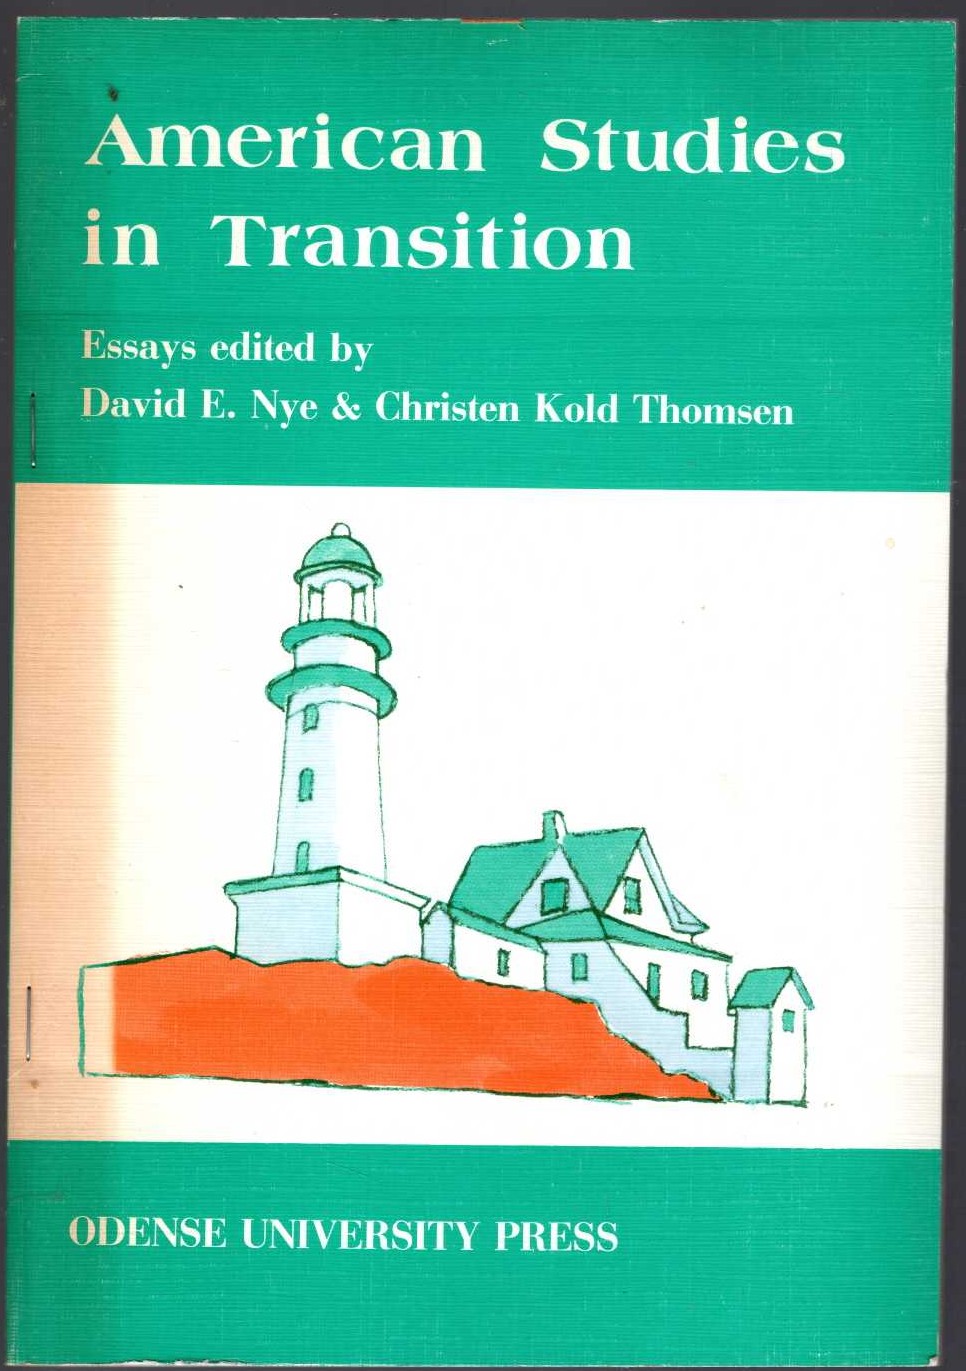 AMERICAN STUDIES IN TRANSITION front book cover image